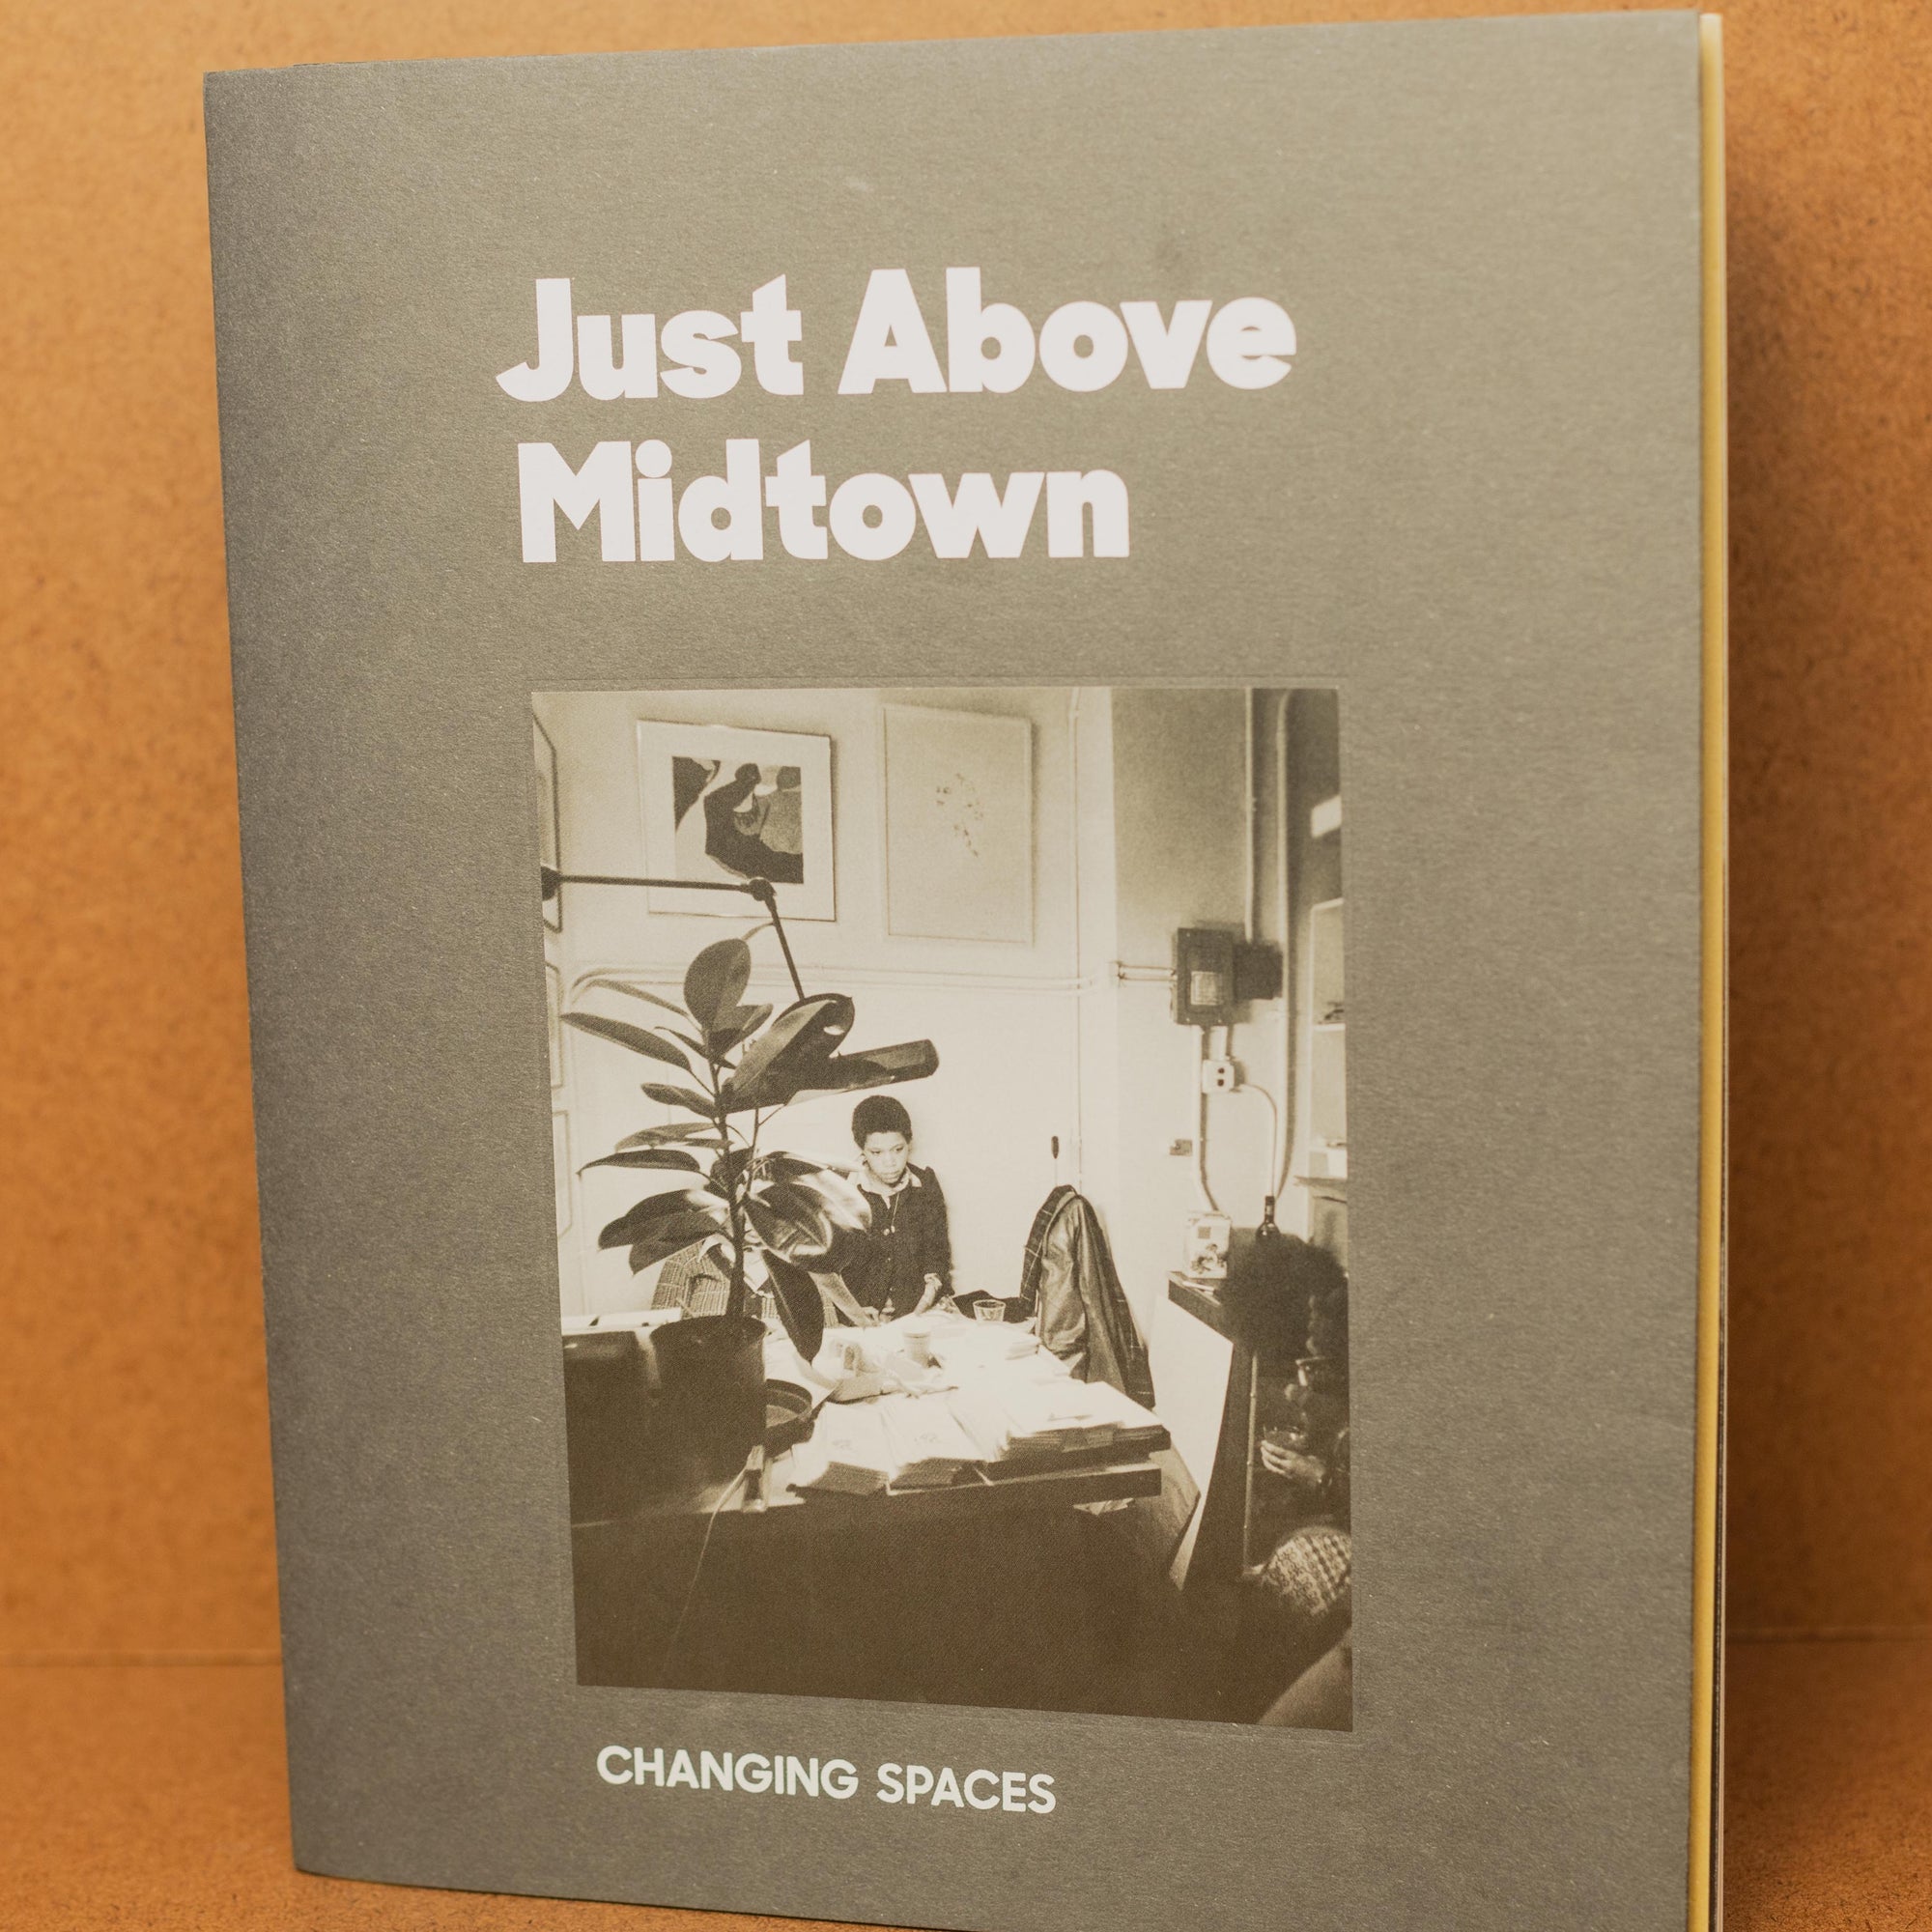 Just Above Midtown: Changing Spaces